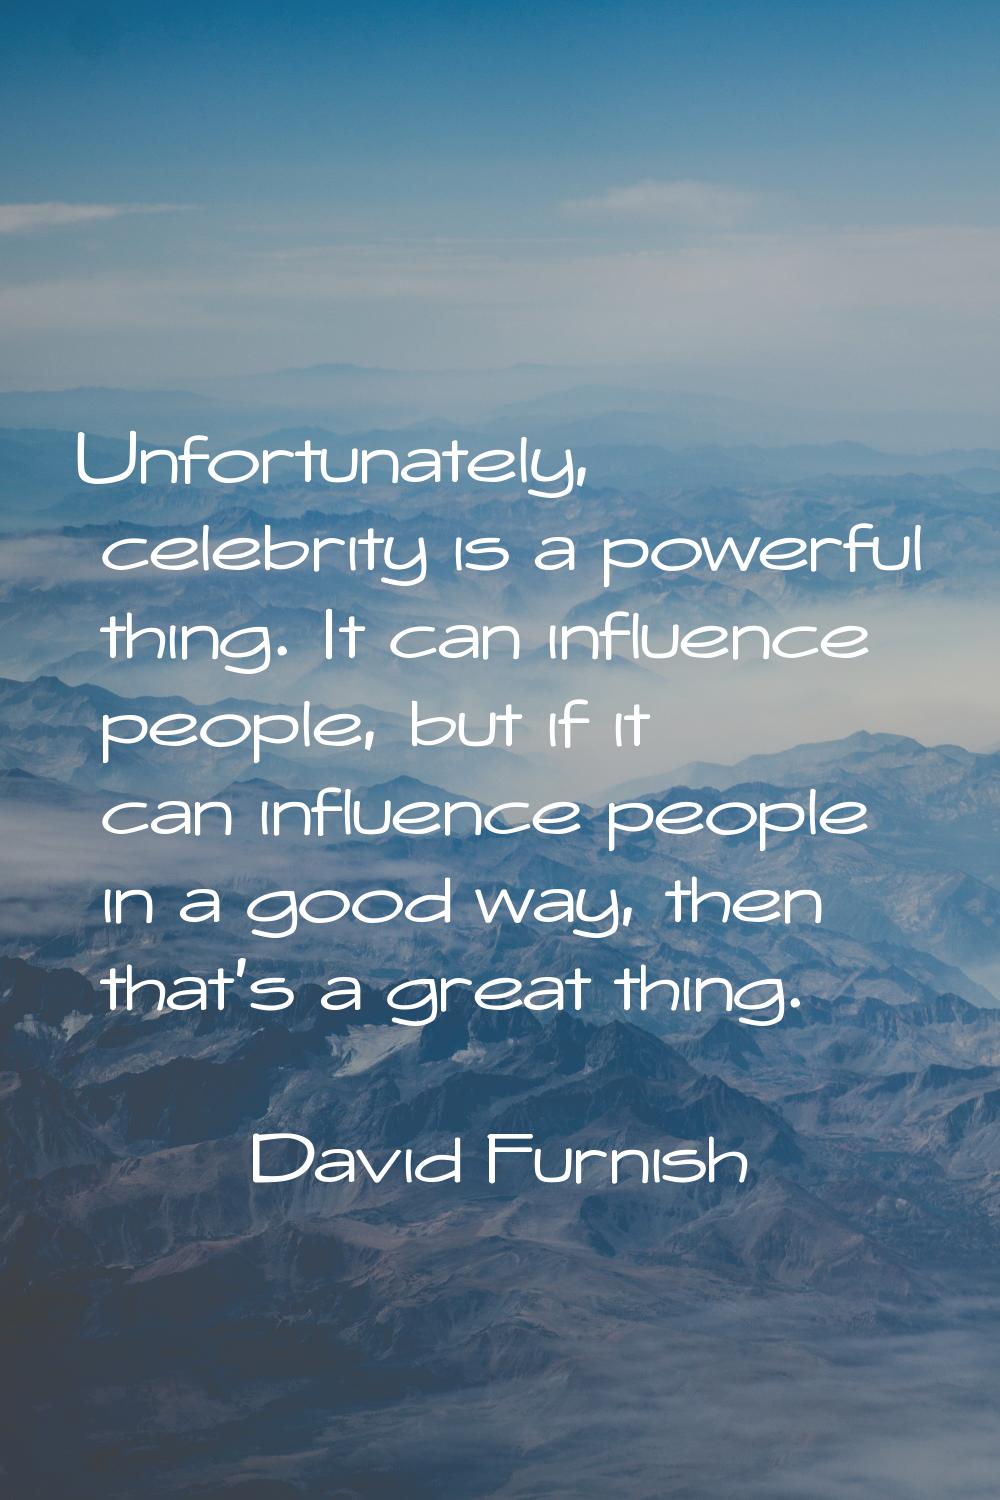 Unfortunately, celebrity is a powerful thing. It can influence people, but if it can influence peop